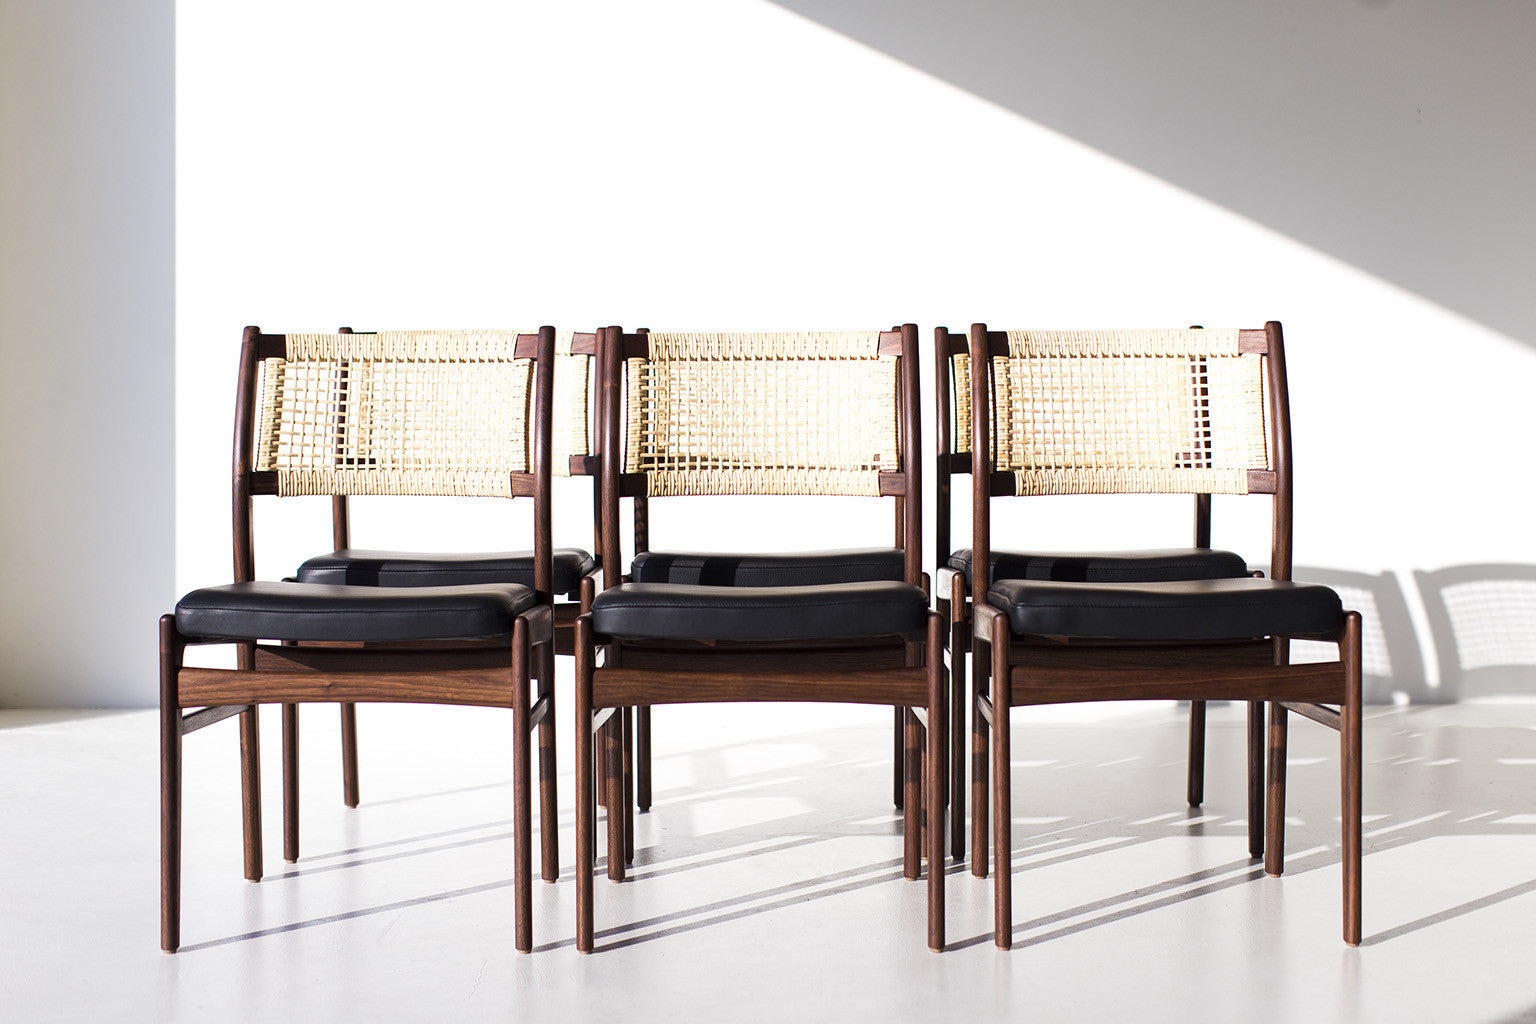 sylve-stenquist-dining-chairs-tribute-furniture-T-1002-12